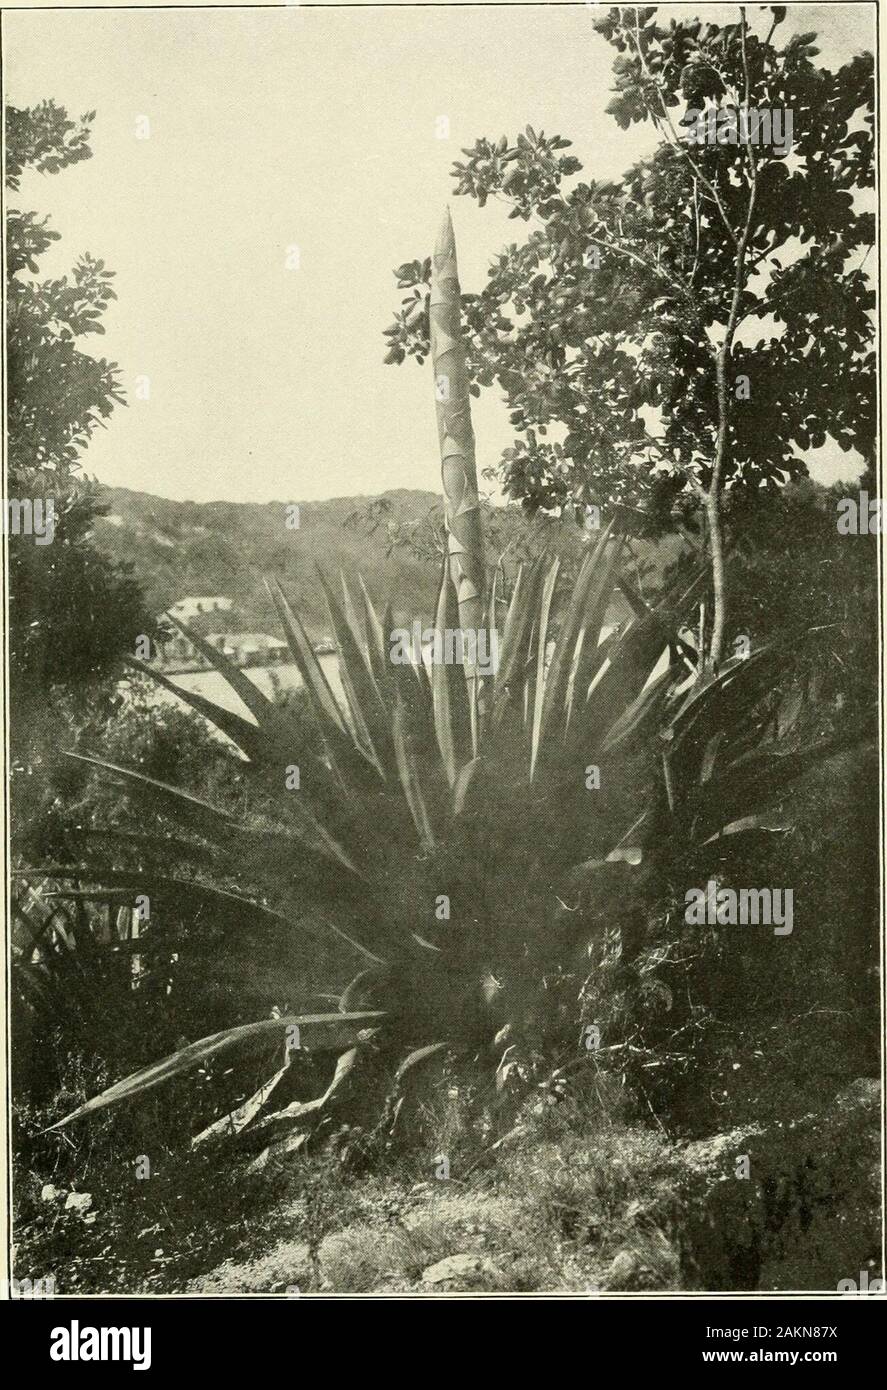 Expeditions organized or participated in by the Smithsonian Institution.. . Fig. 40. -A Cereus (C. Icpidotus Salm-Dyck) common on these islands. NearSt. Johns, Antigua. Photograph by Russell. with their Cactus Investigation for the Carnegie Institution ofWashington. Doctor Britton also took a party to the West Indies.Both parties started from New York City January 25. DoctorBritton and his assistants explored St. Thomas, St. Jan and othersof the Virgin Islands, Porto Rico, and Curacao. His collection con-sisted of more than 3,000 species, comprising two sets, one of whichhas been sent to the N Stock Photo